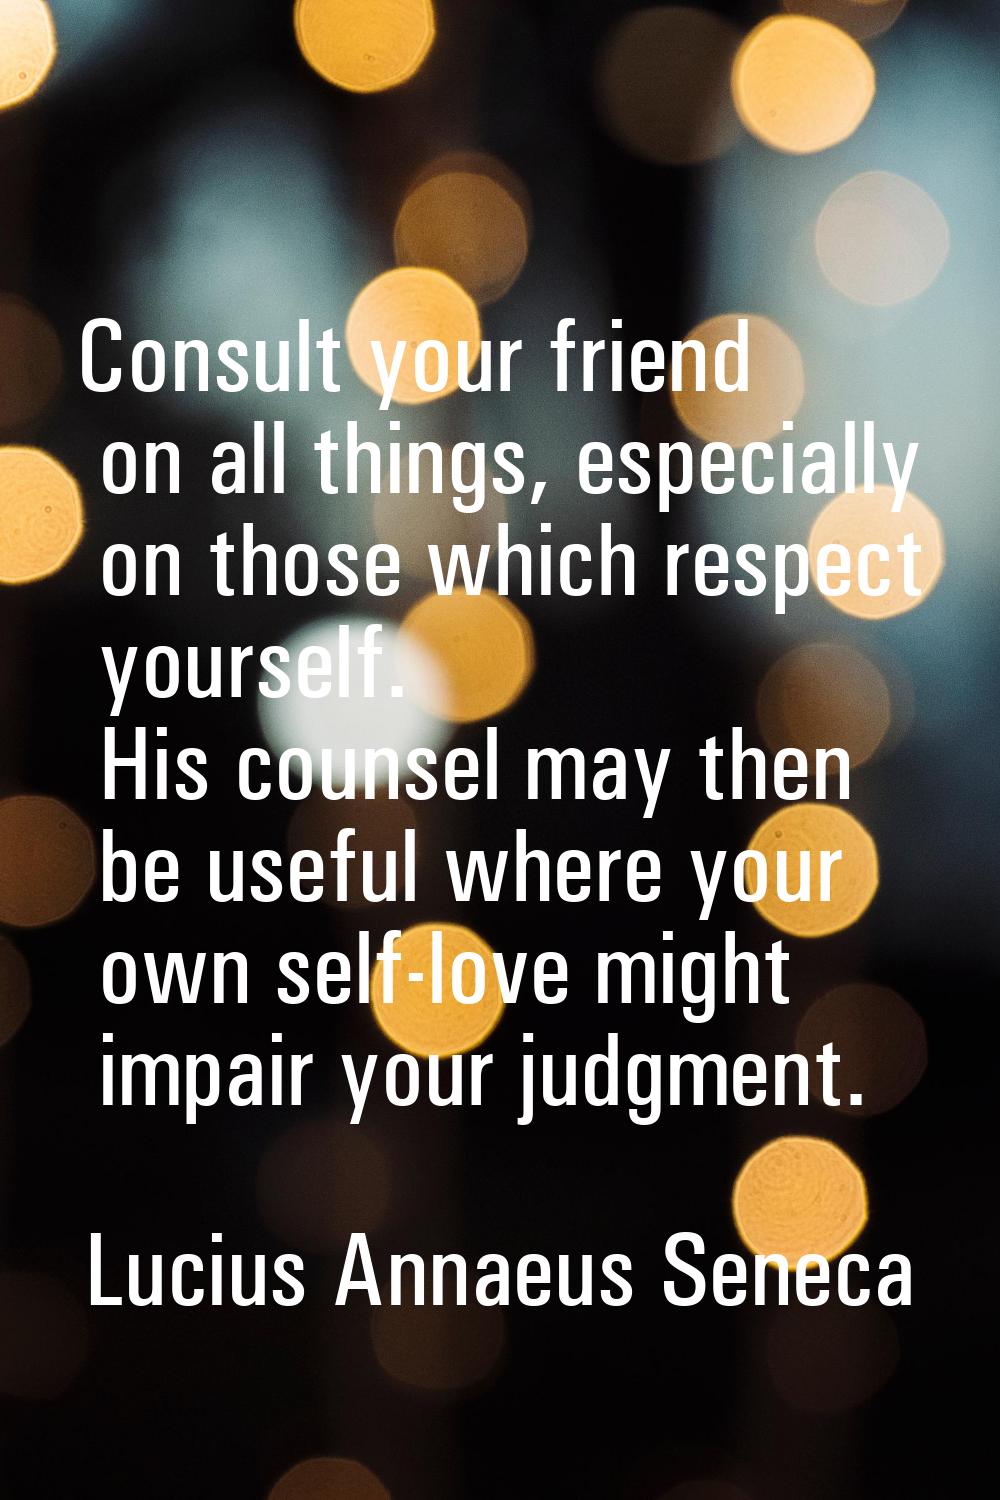 Consult your friend on all things, especially on those which respect yourself. His counsel may then